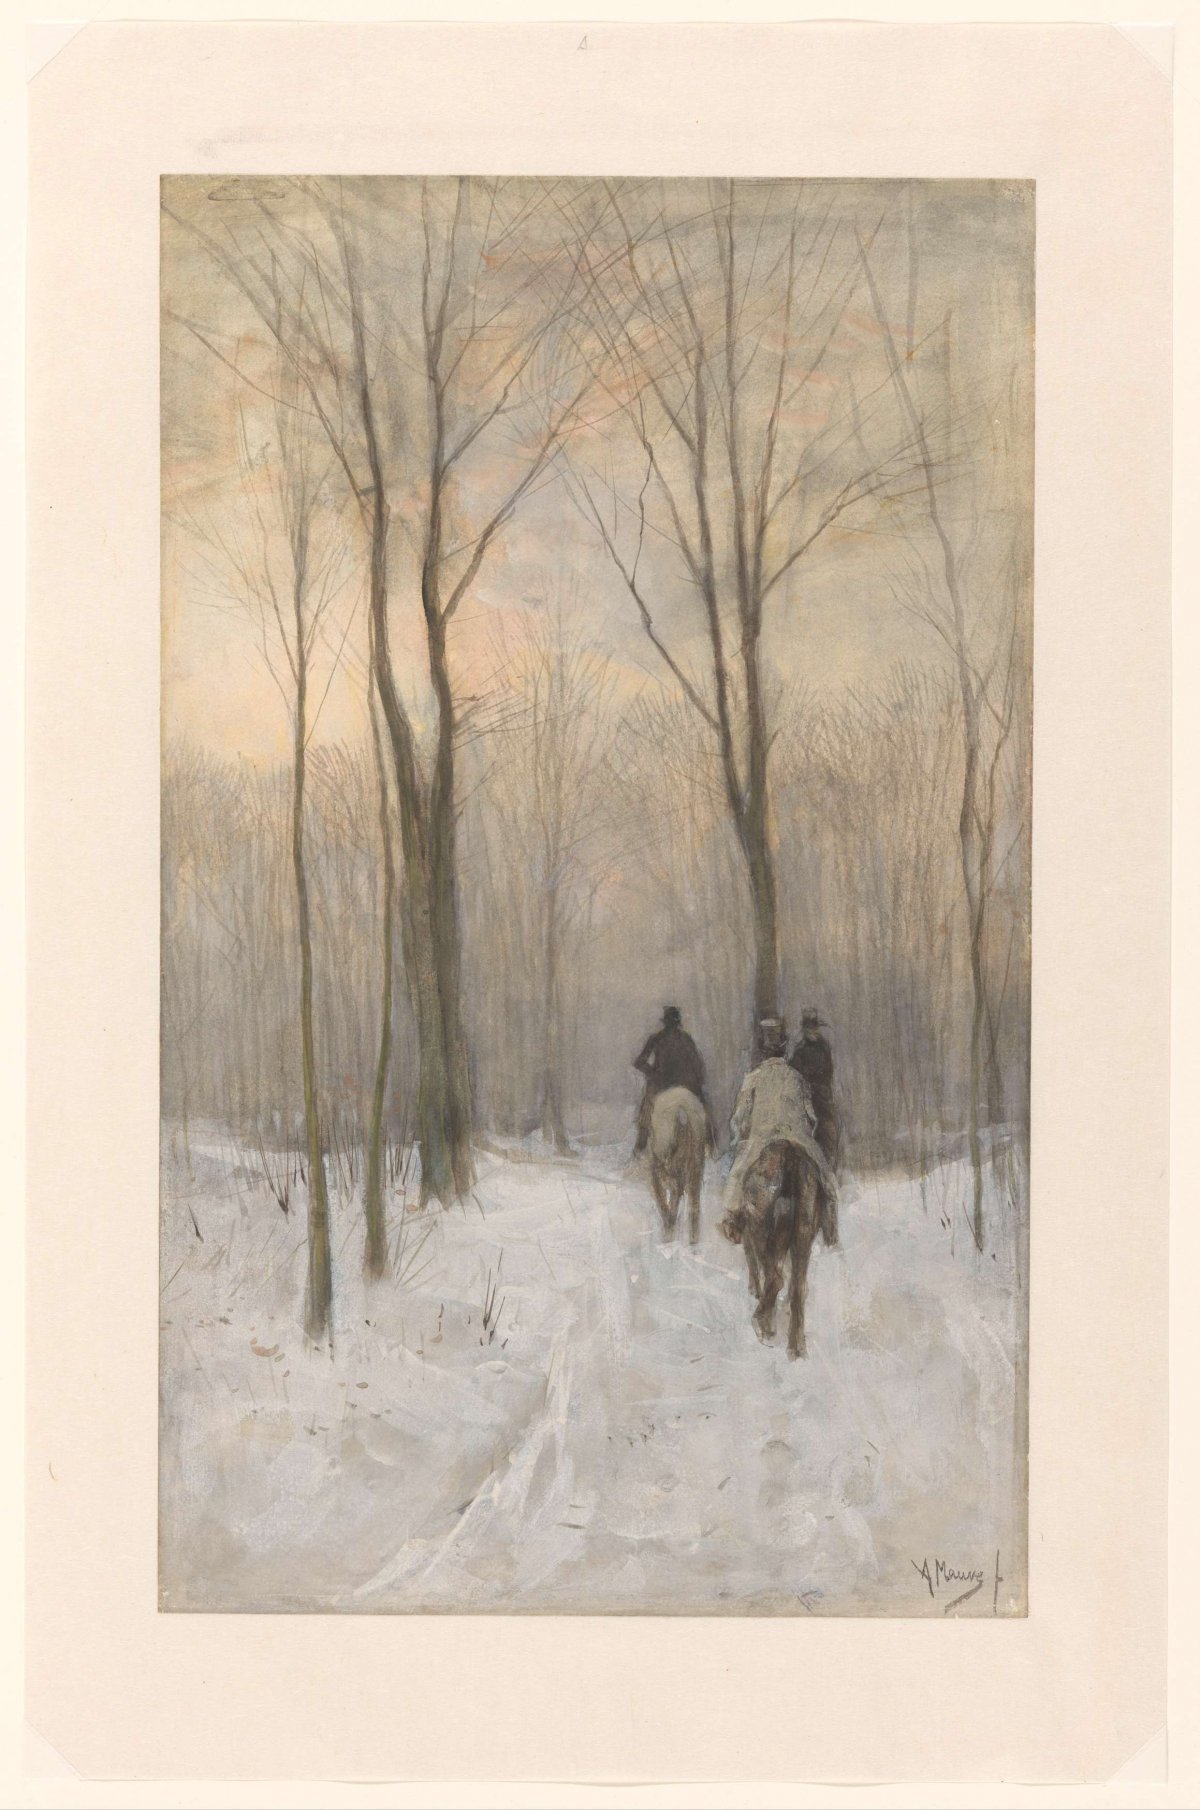 Riders in the Snow in the Haagse Bos, Anton Mauve, 1880